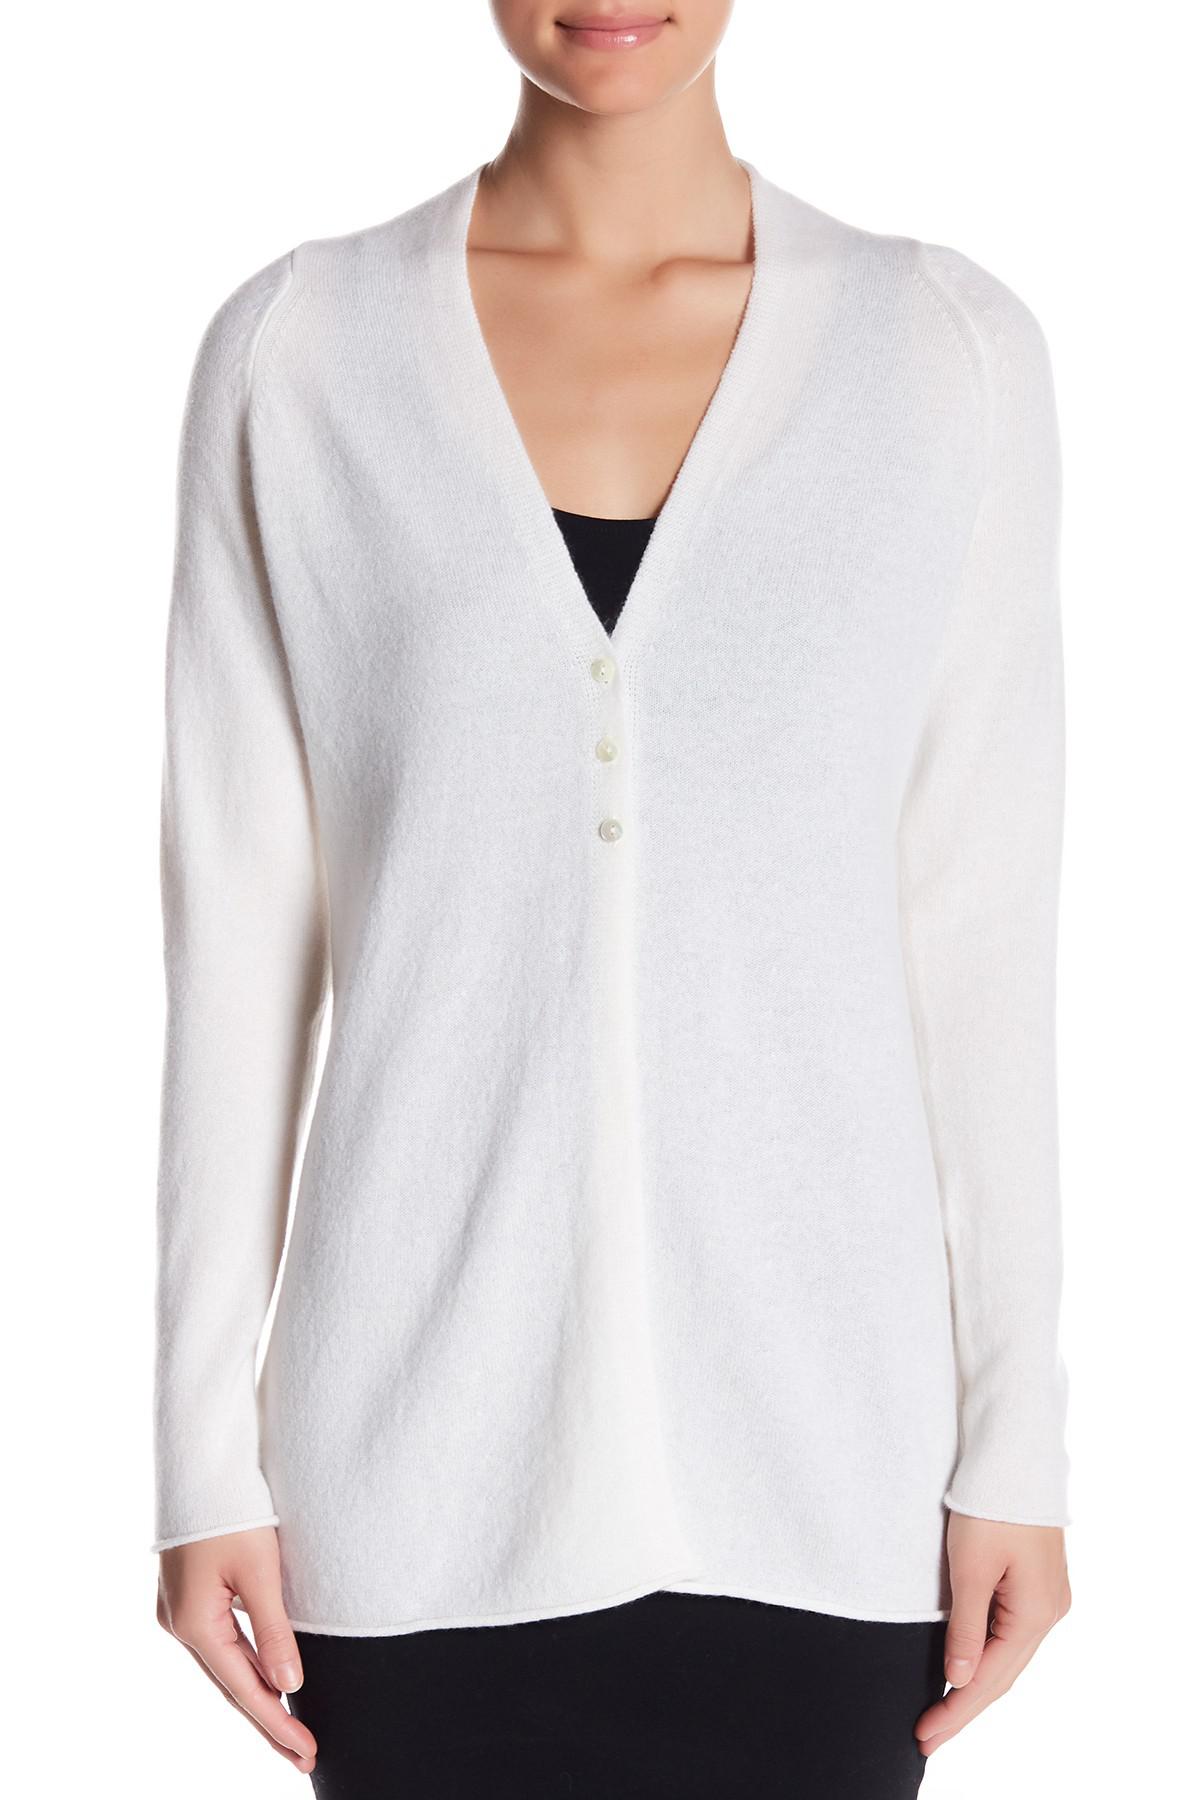 Lyst - Griffen Cashmere Cashmere V-neck Button-up Cardigan in White